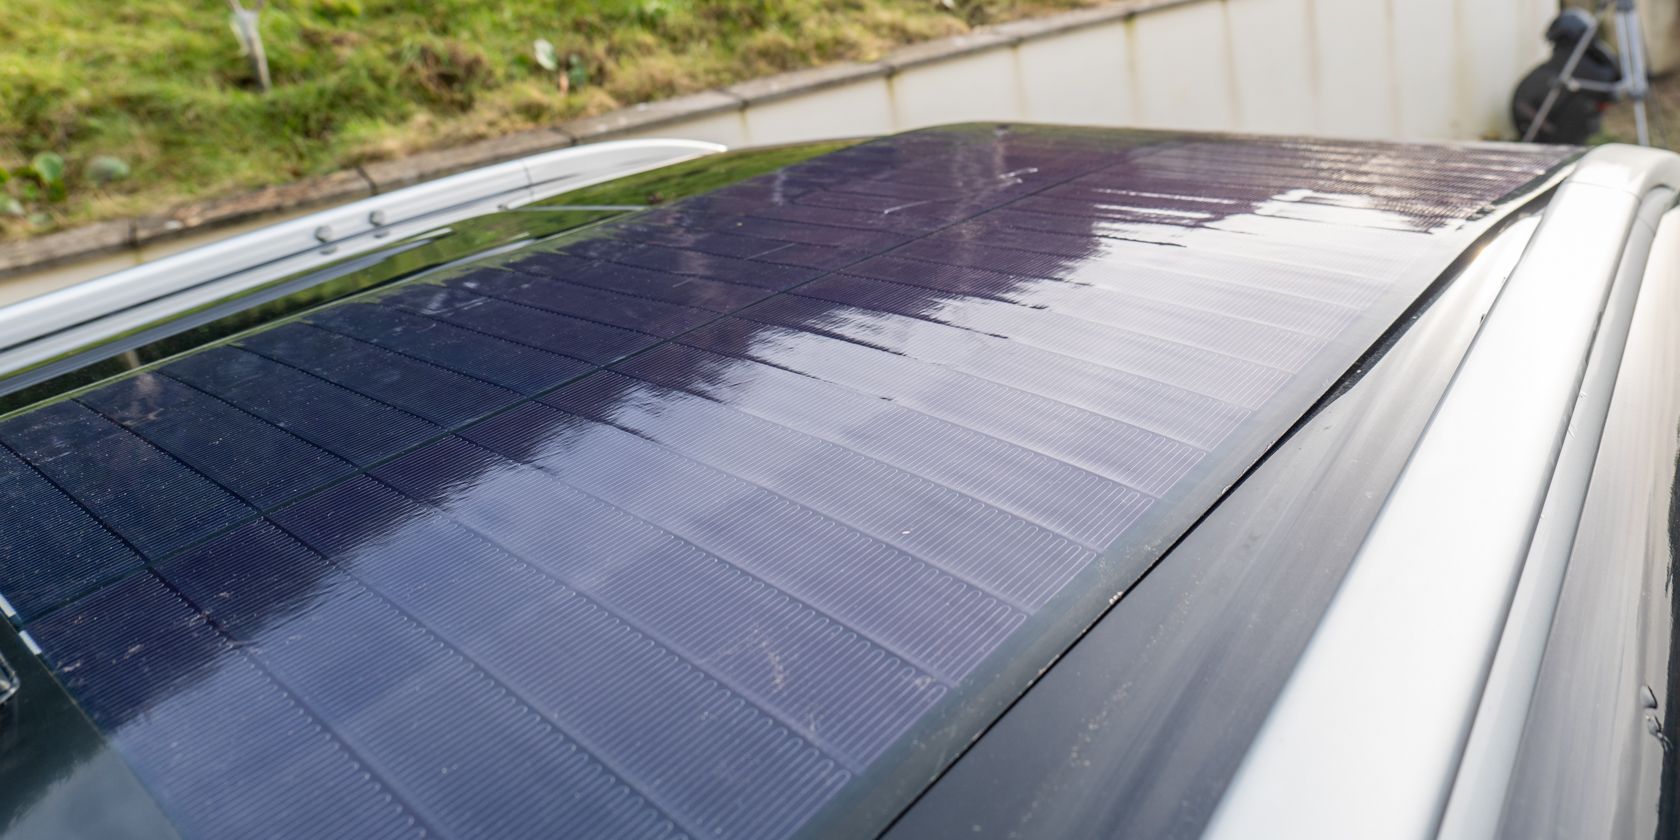 BougeRV Yuma 200W Flexible Solar Panel Review: Peel-and-Stick Power Anywhere